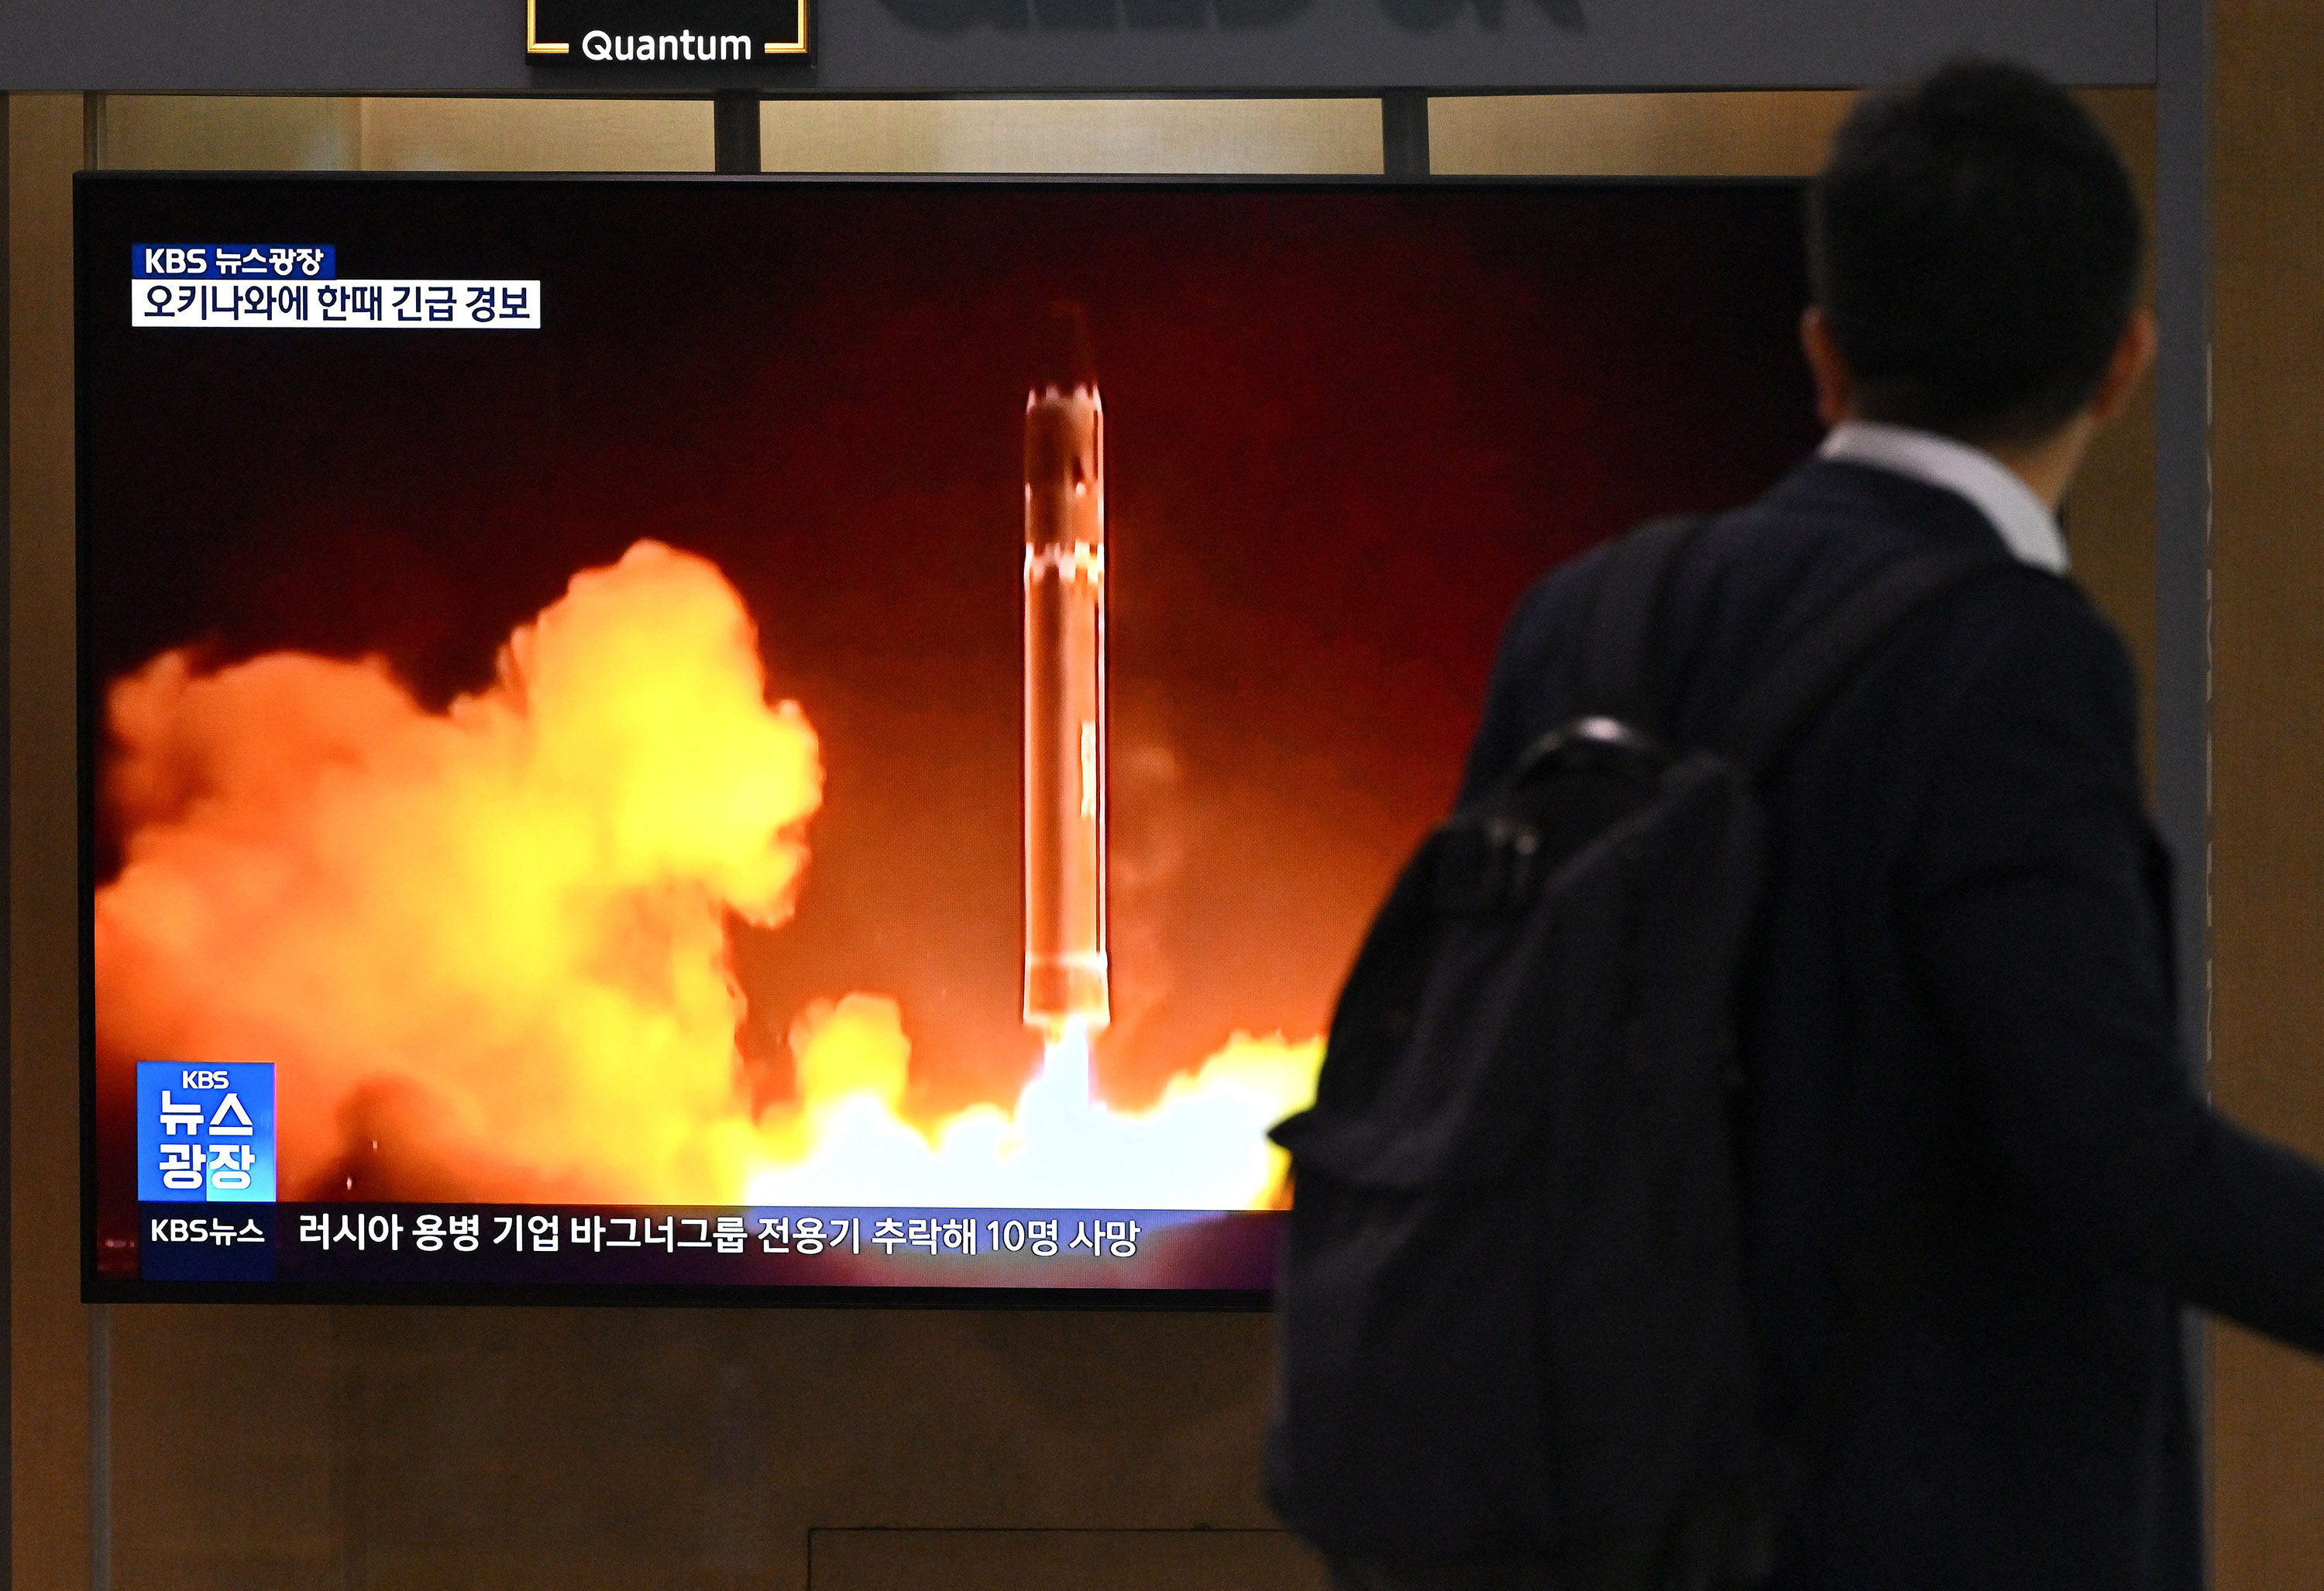 A TV screen shows a report of North Korea’s rocket launch during a news programme at the Seoul Railway Station in Seoul, South Korea, on Friday. Photo: AFP / Getty Images / TNS